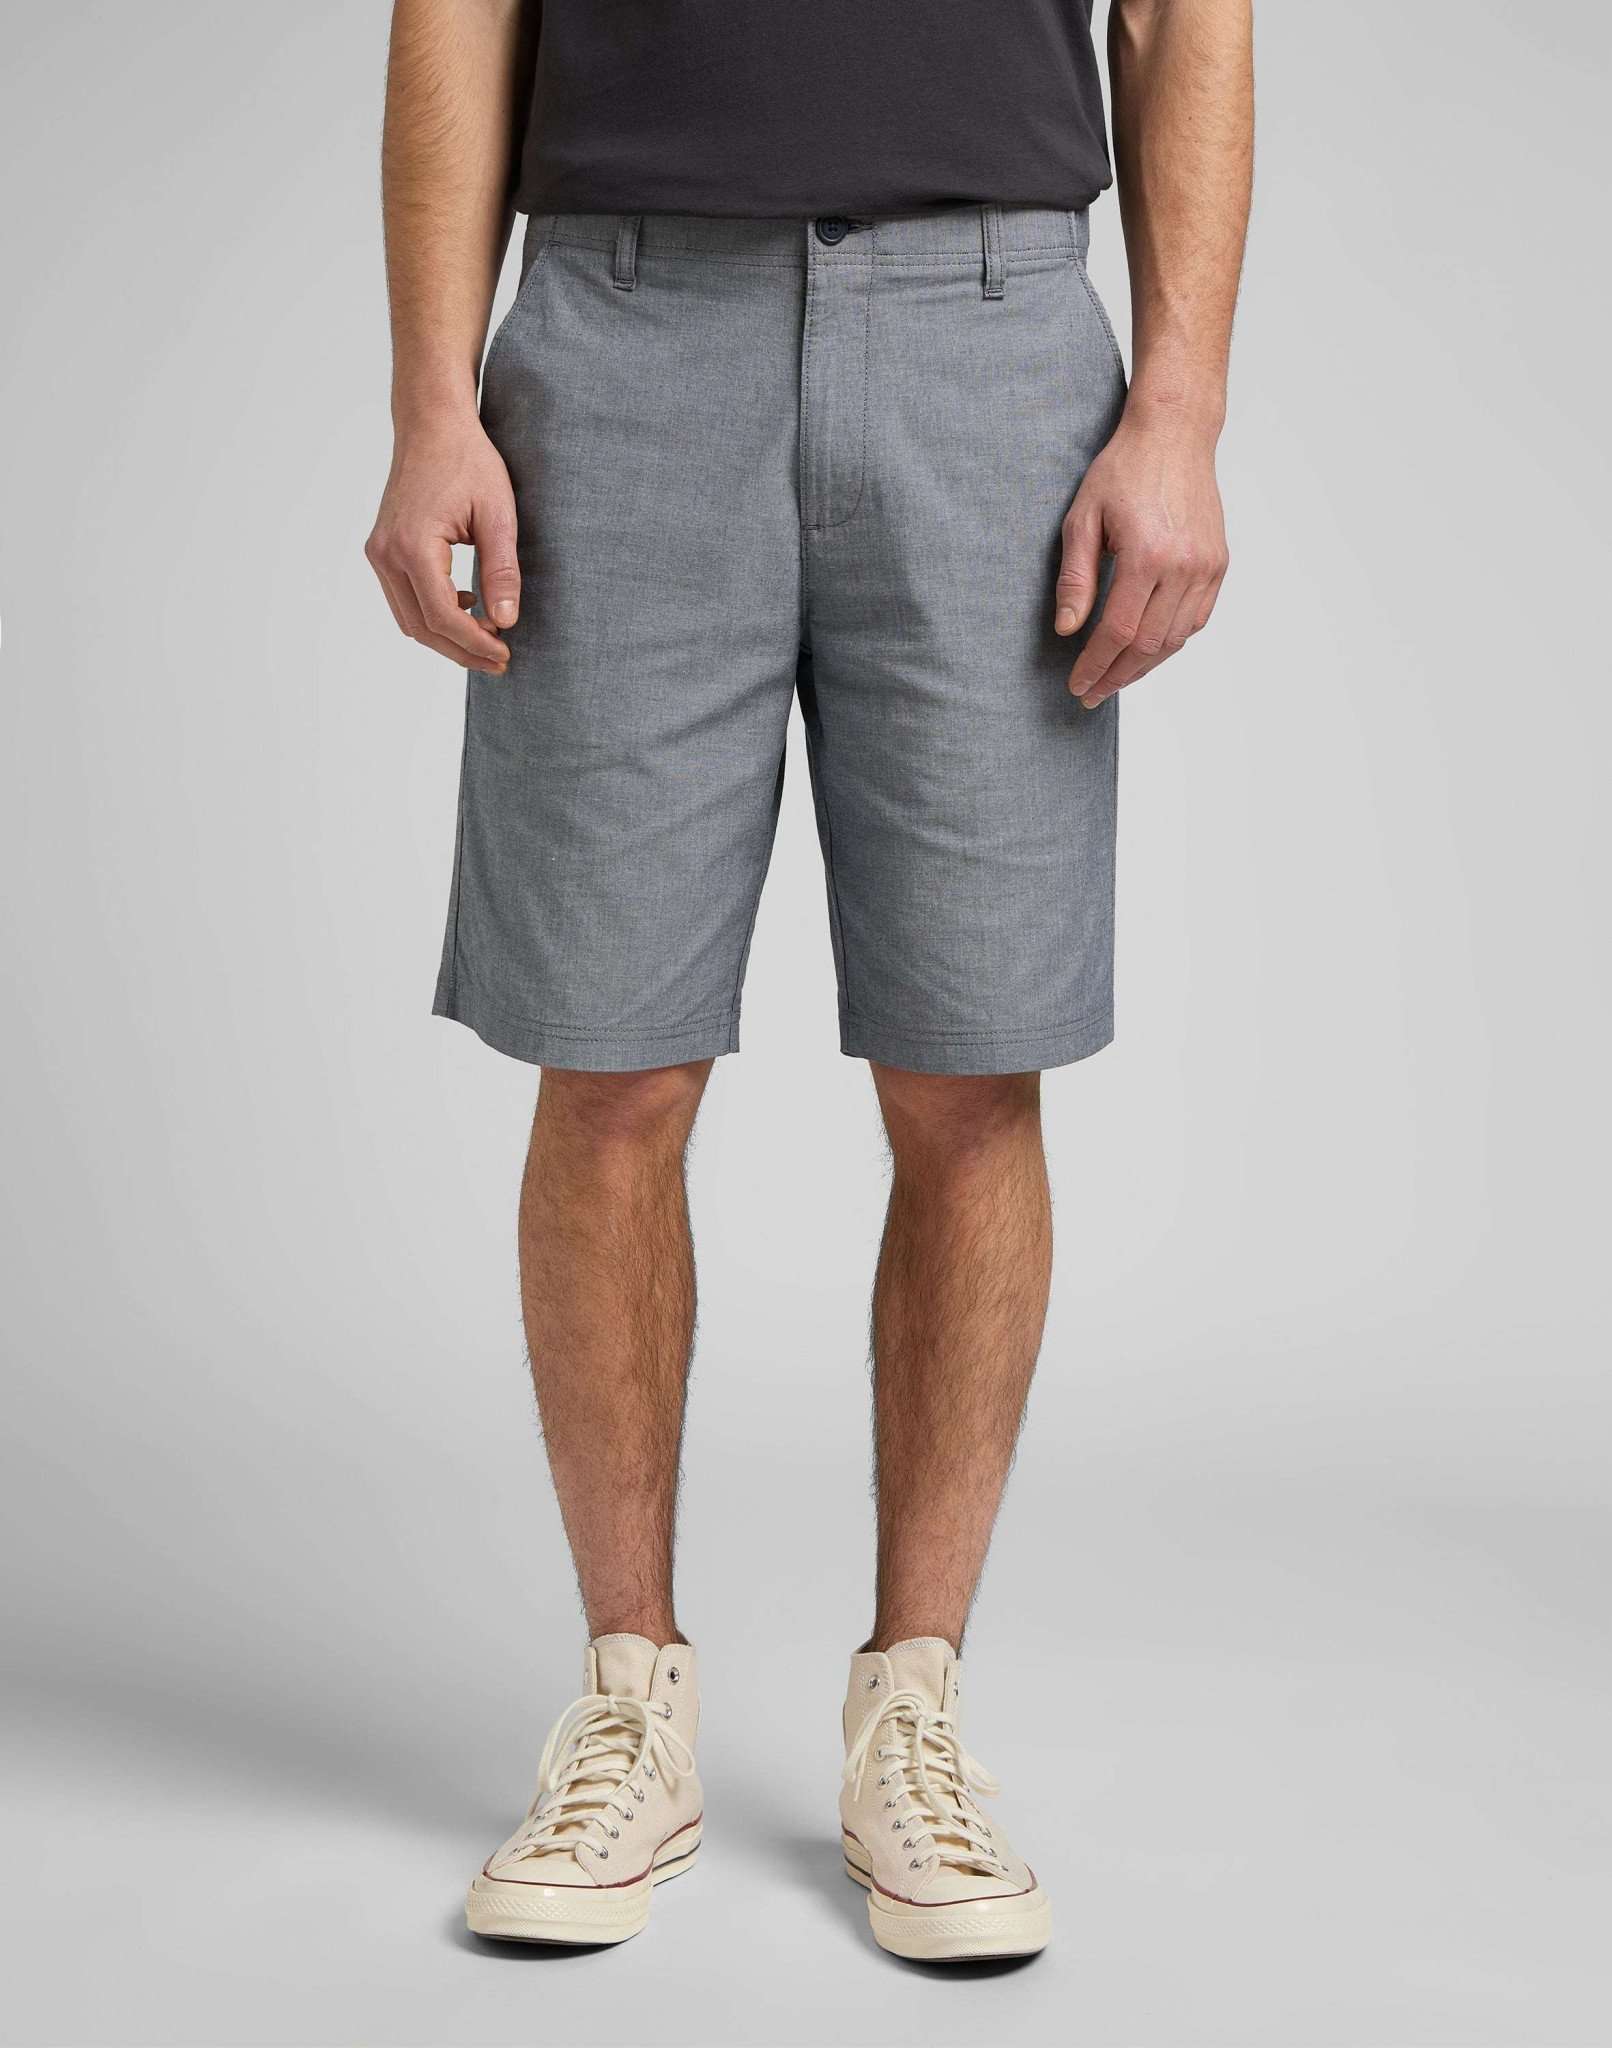 XC Chino Short in Chambray Jeansshorts Lee   